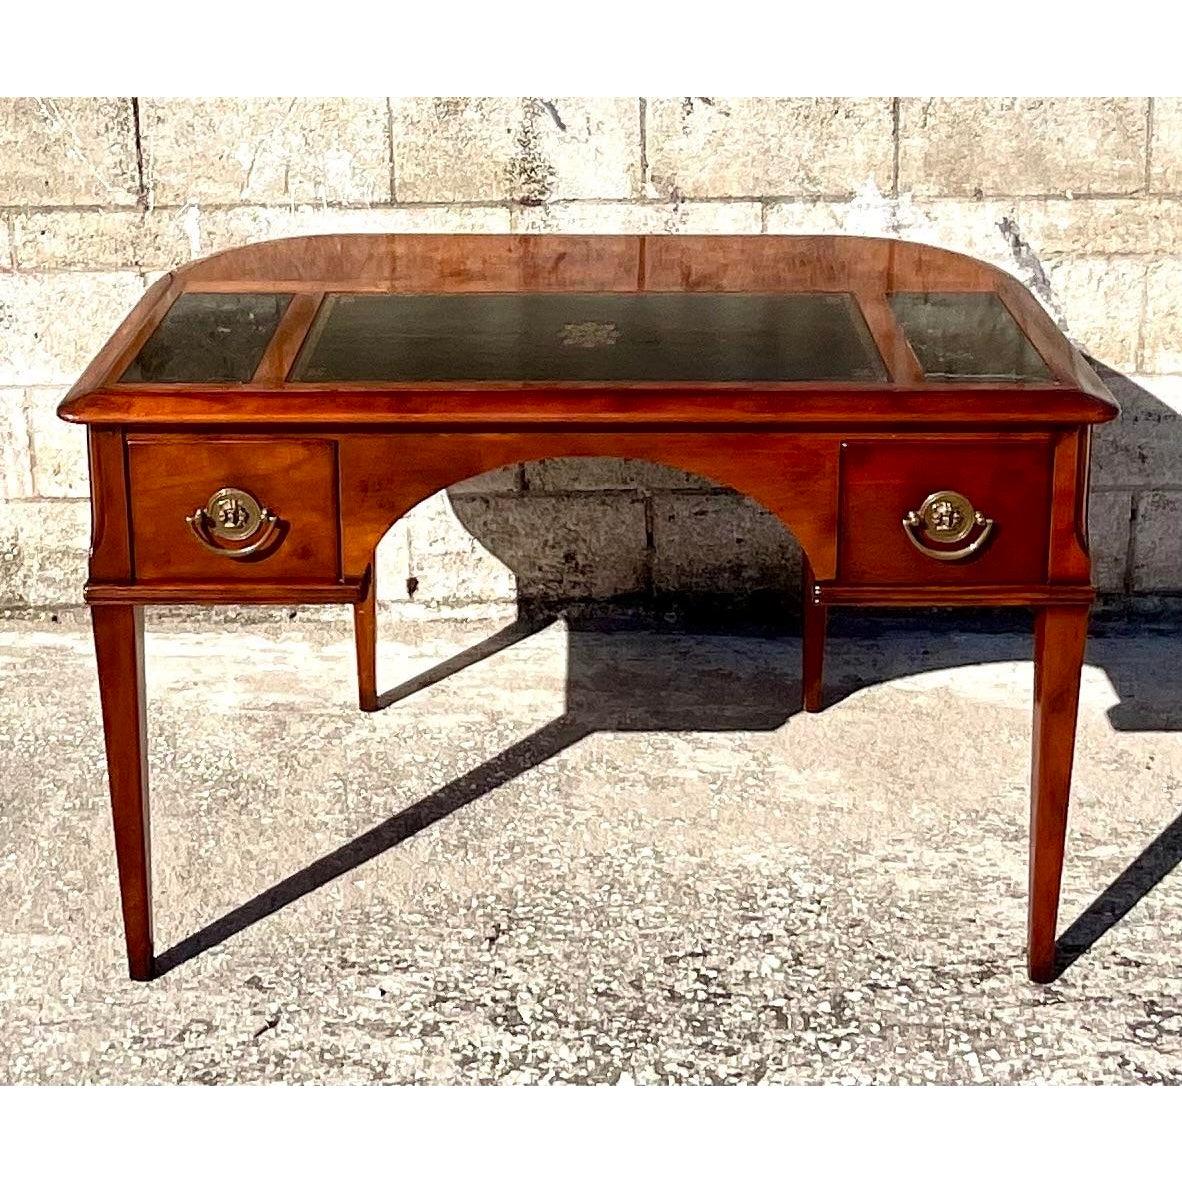 Incredible Midcentury writing desk. Beautiful inset Carrera marble and leather panel with embossed gold leaf detail. Pull out trays and hidden pull out partners writing table. Marquetry details along the front. Acquired from a Palm Beach estate.